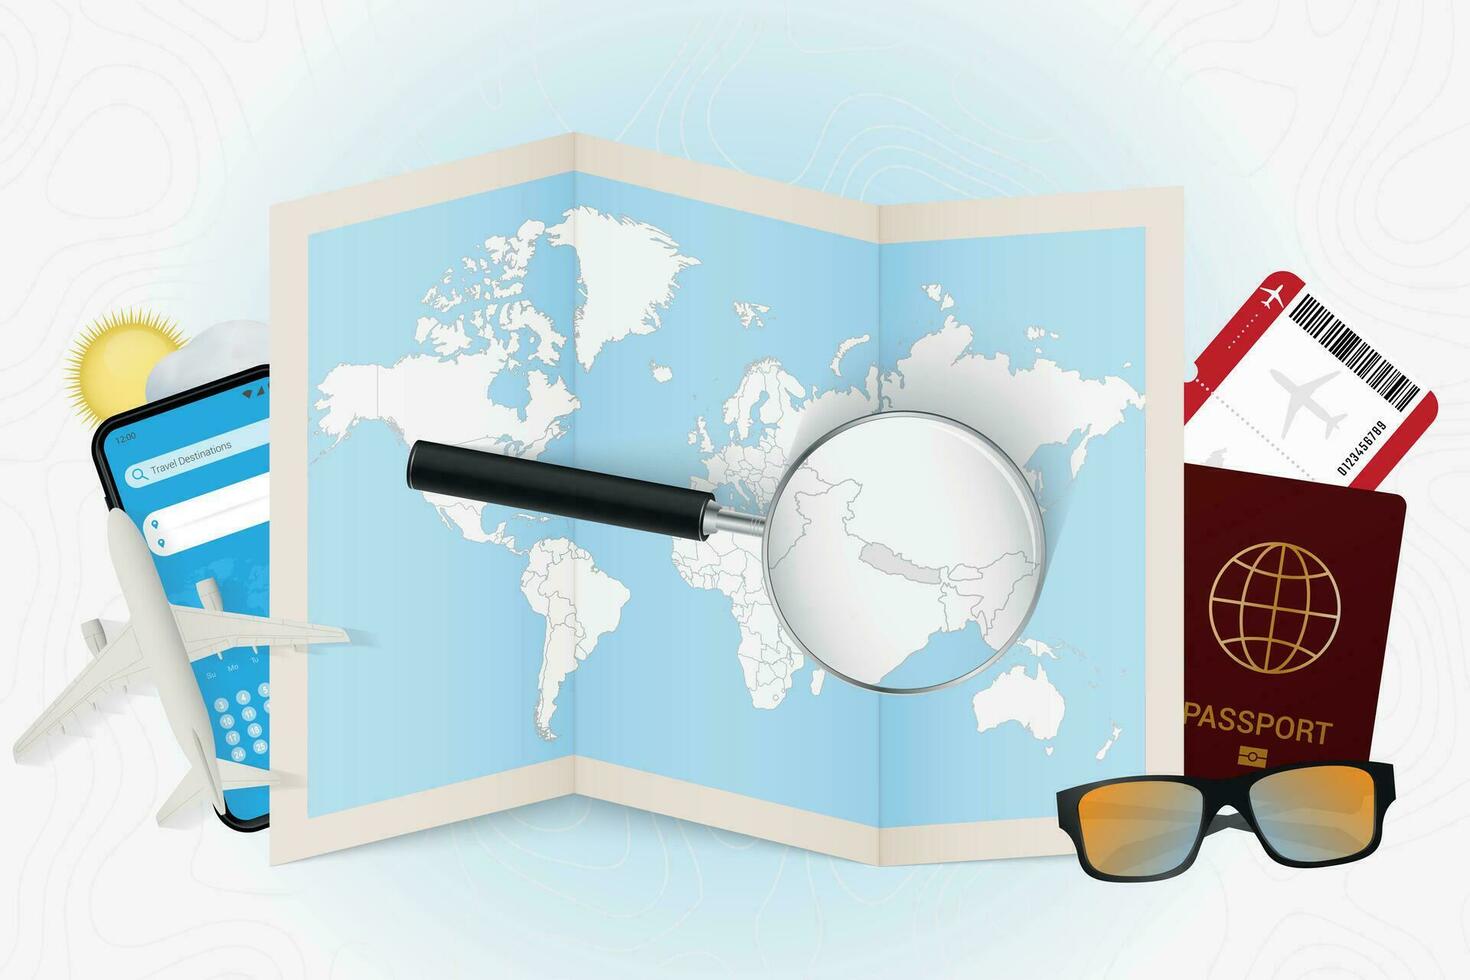 Travel destination Nepal, tourism mockup with travel equipment and world map with magnifying glass on a Nepal. vector